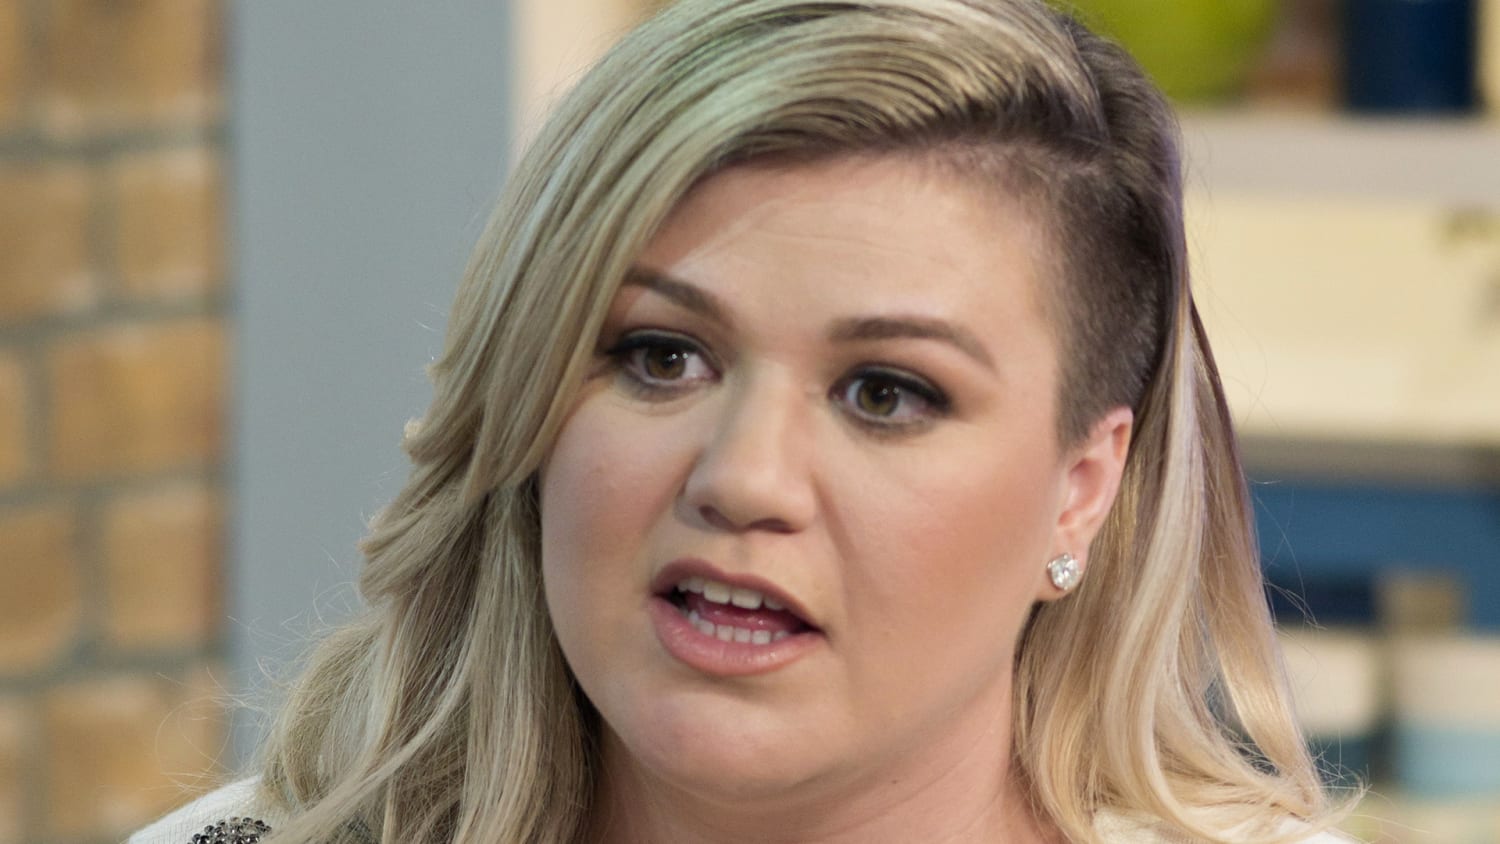 Kelly Clarkson says Dr. Luke is 'not a good person' .